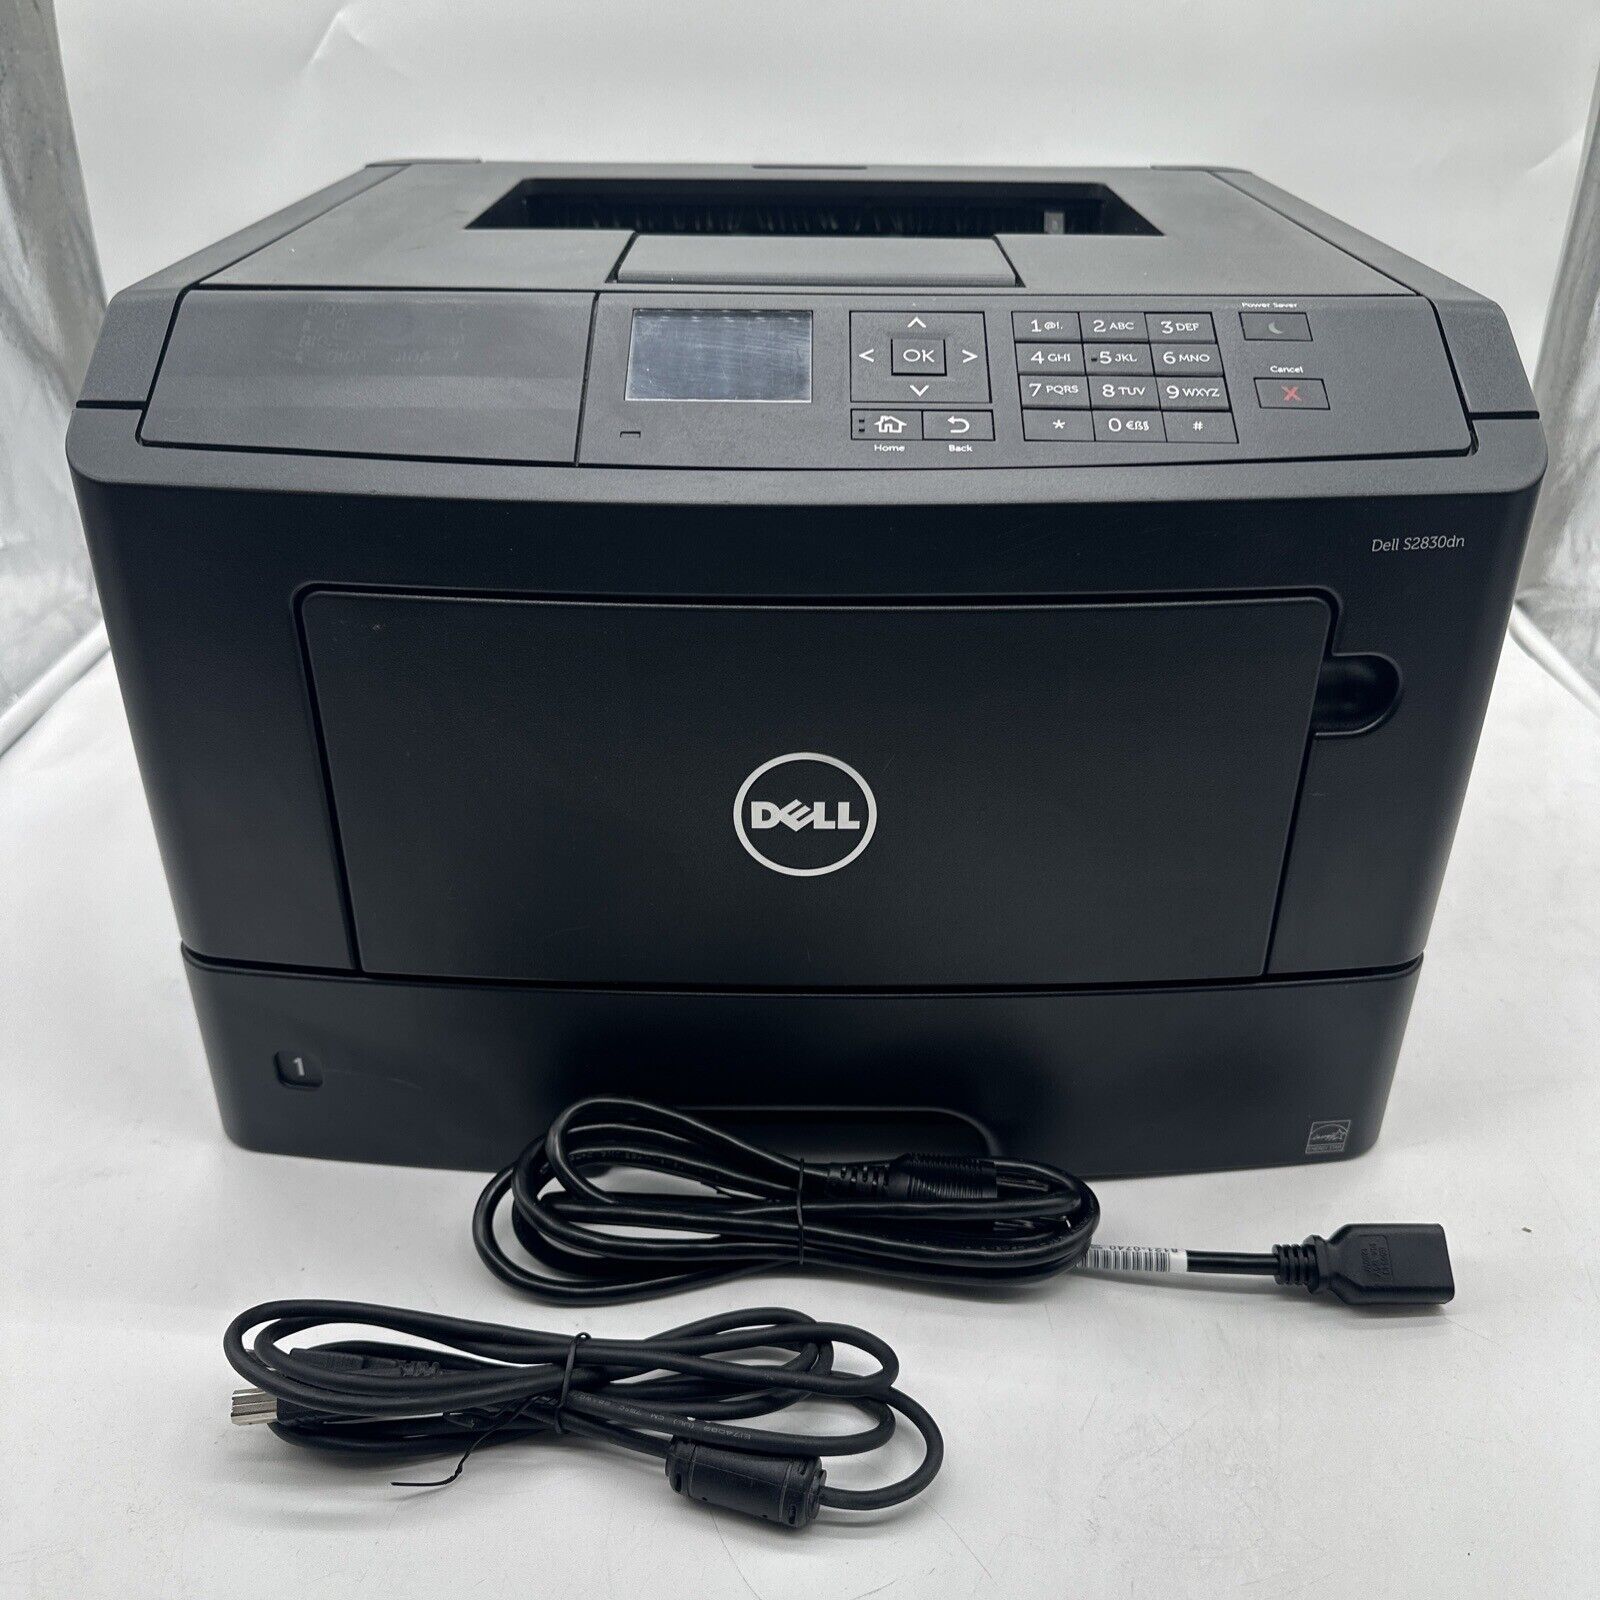 DELL S2830dn Smart Printer Without Toner, 20725 Pages